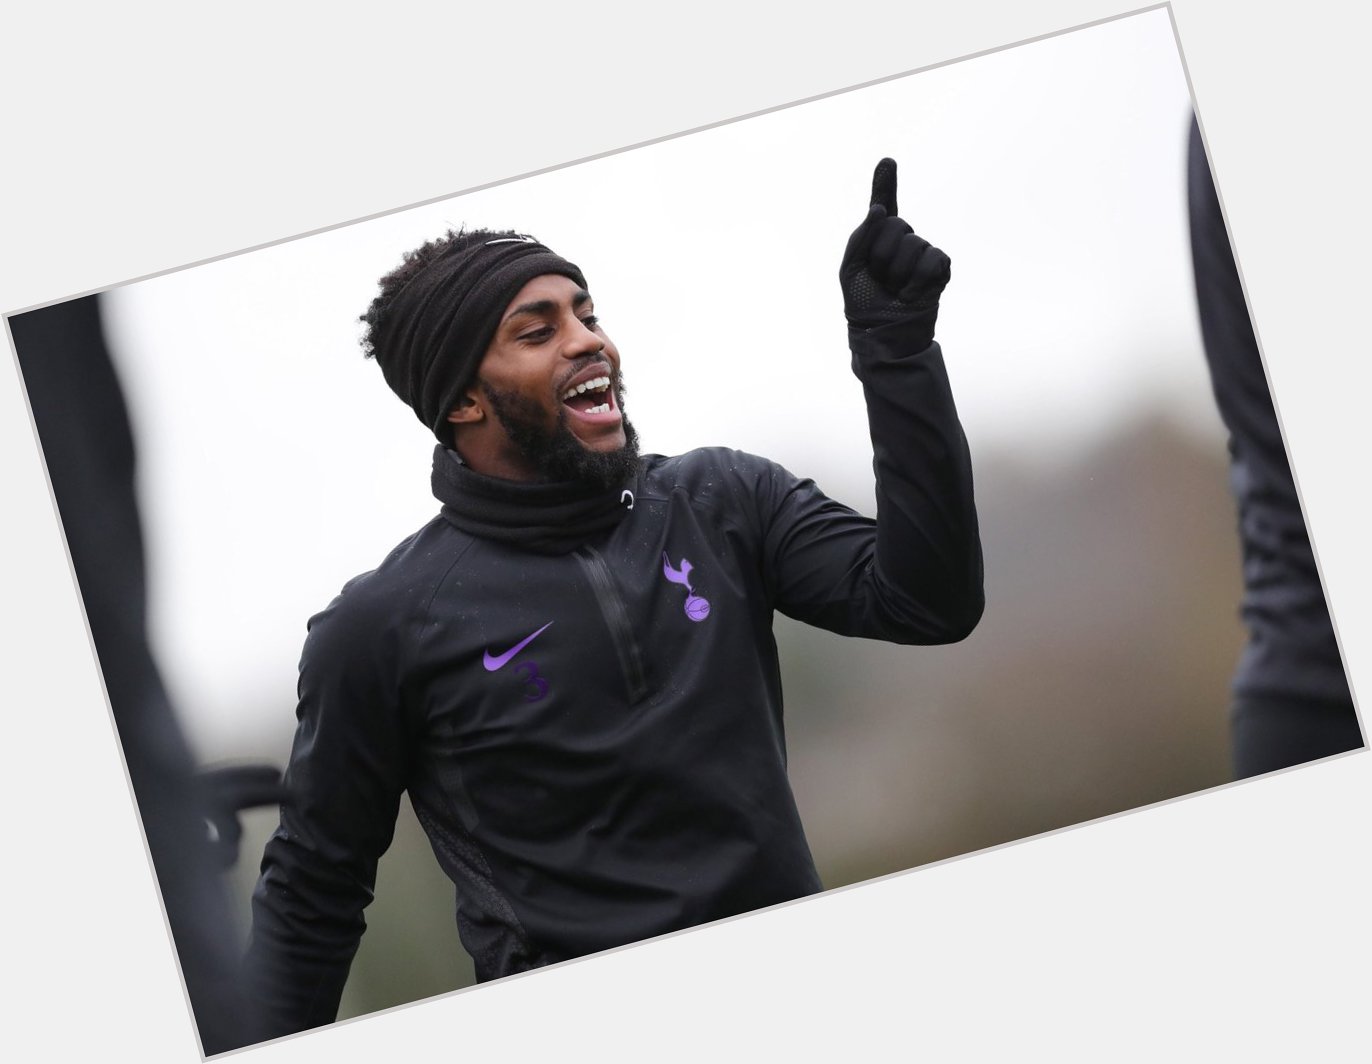  Happy Birthday to Danny Rose who turns 29 today. 